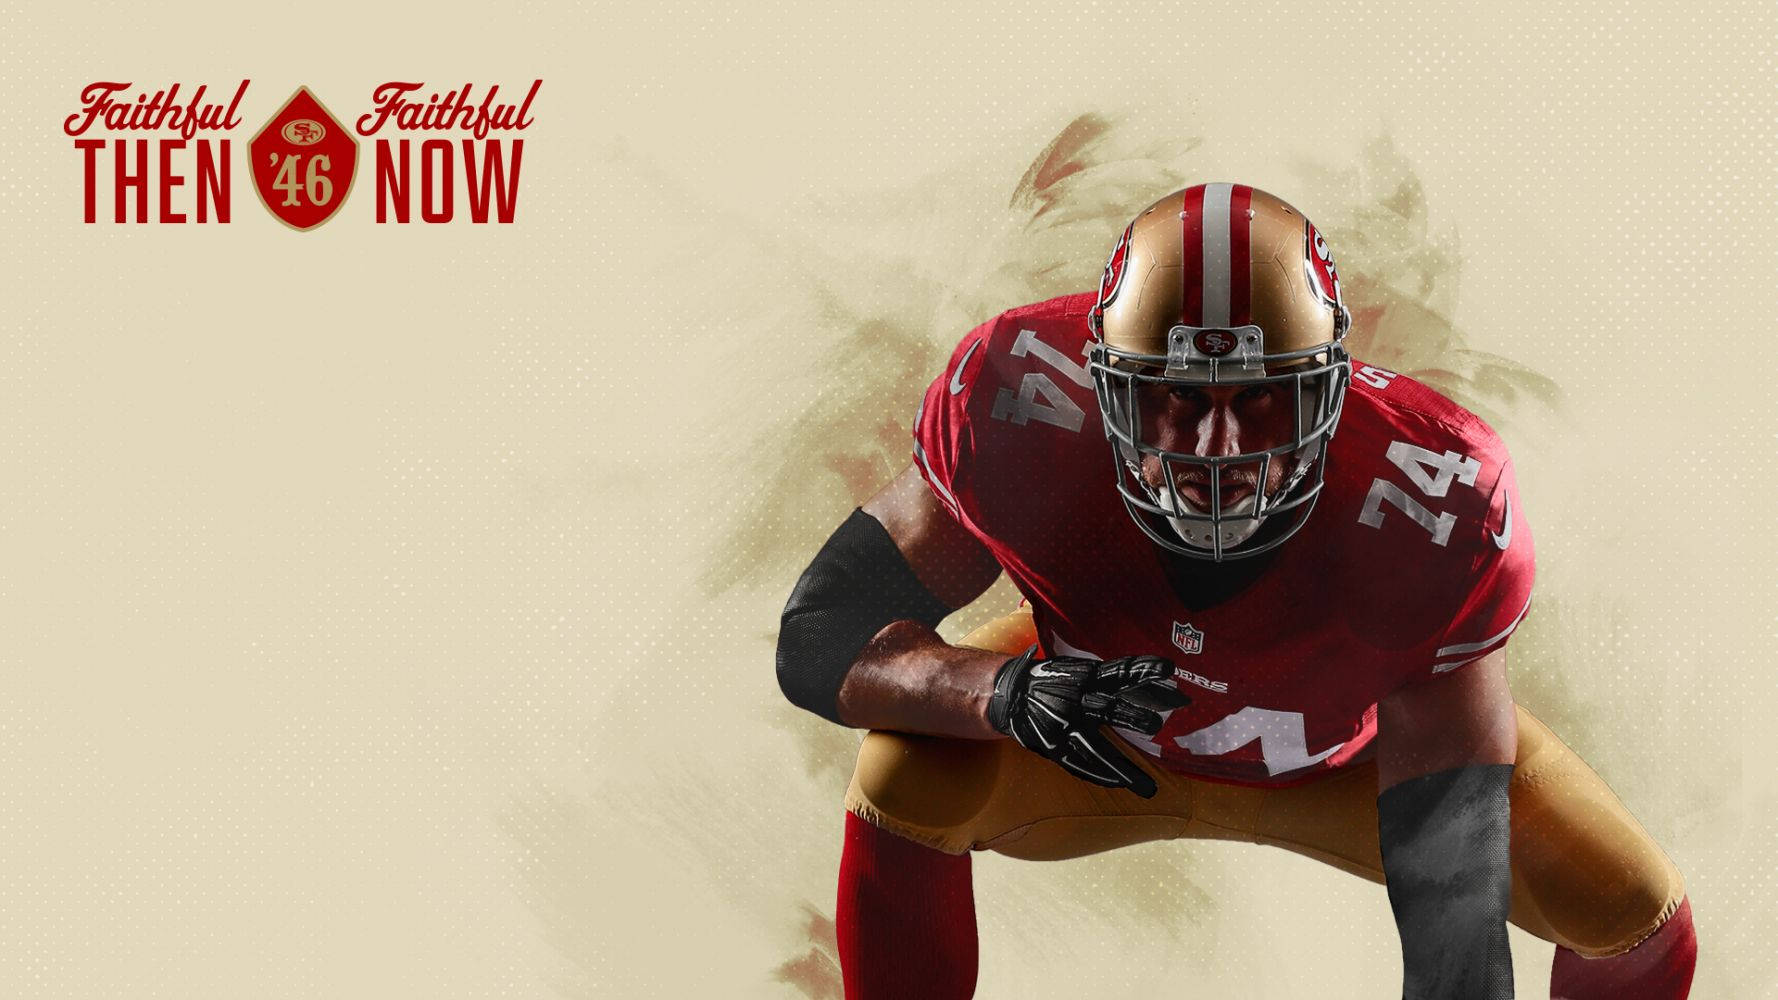 Joe Staley 49ers Poster Background